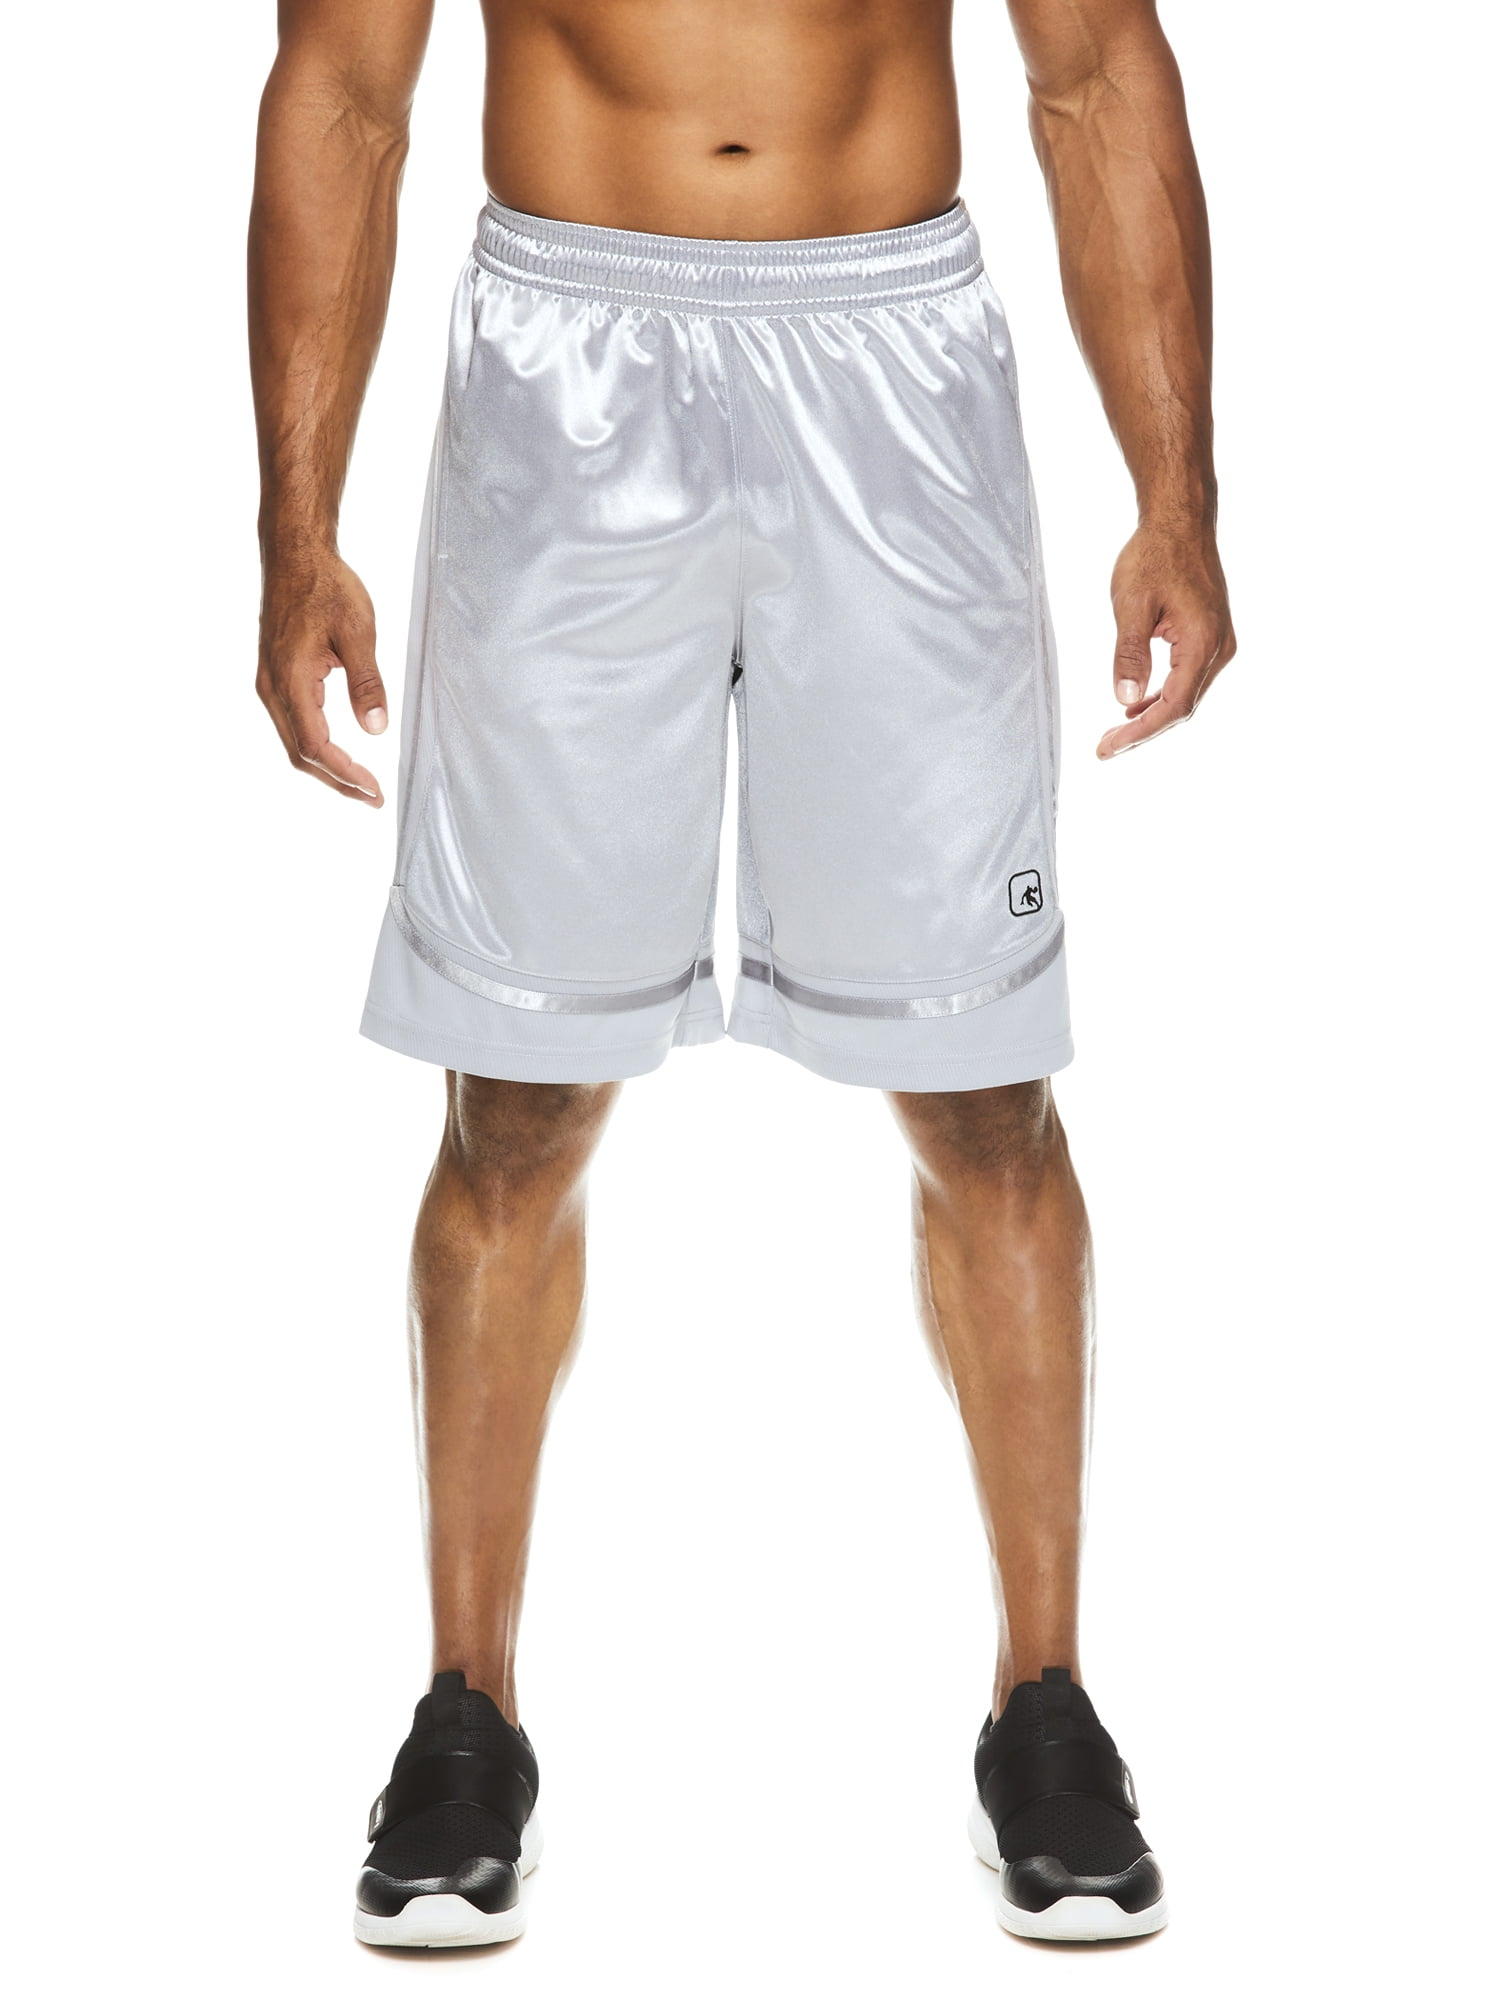 AND1 Men's and Big Men's Active All Courts 11 Basketball Shorts, Up To  Size 5XL 